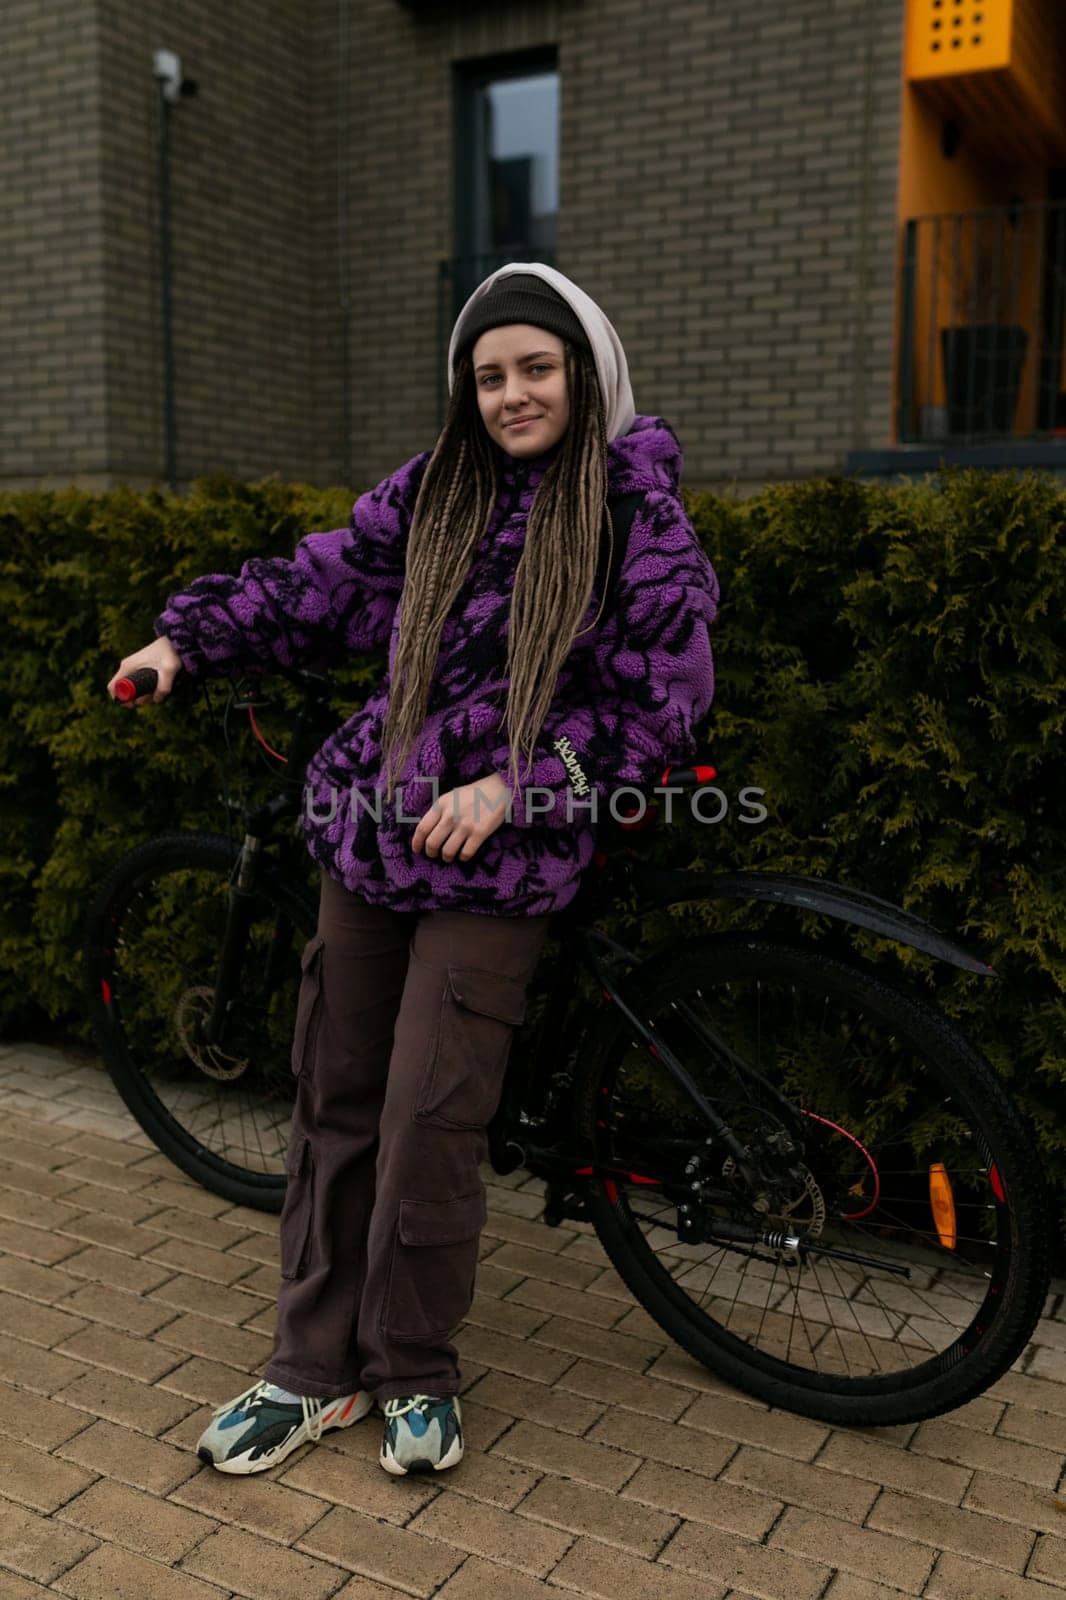 Bicycle rental concept. Young woman riding a sports bike around the city.